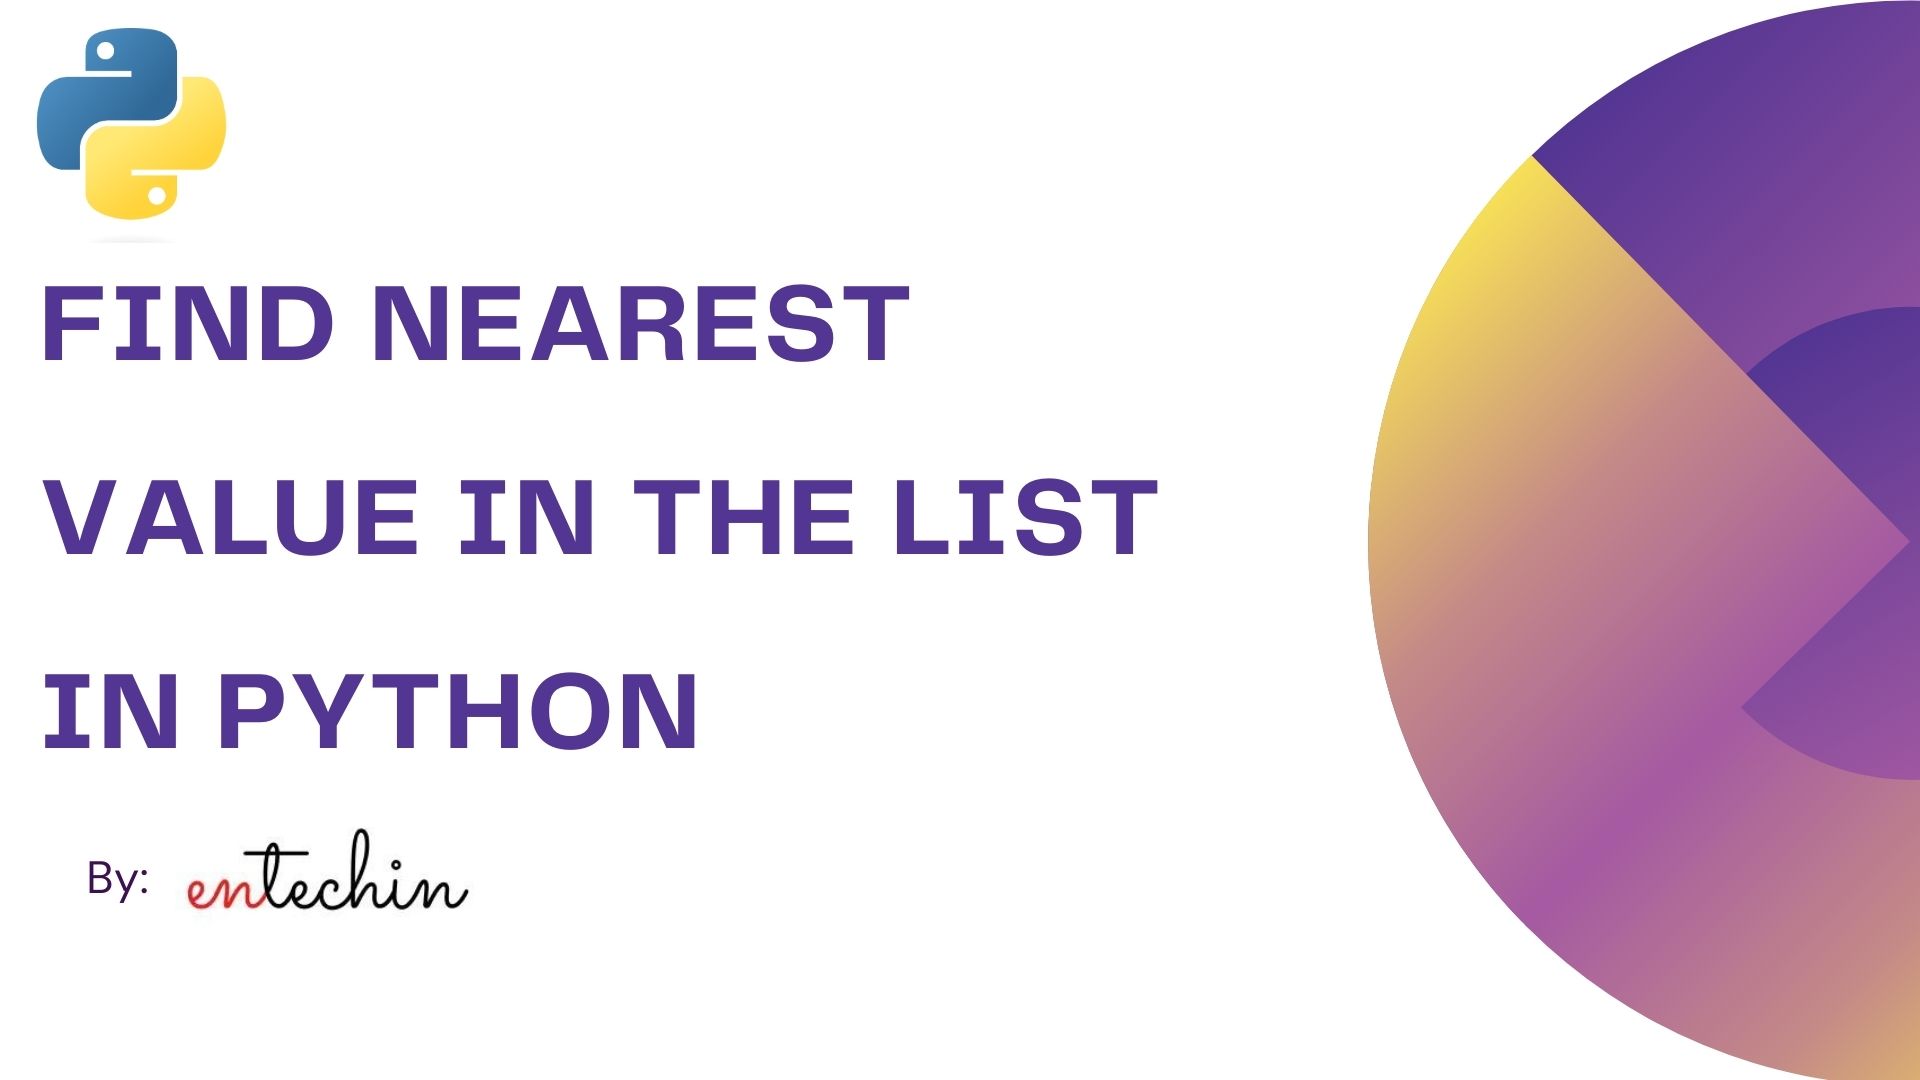 Find nearest value in the list in Python